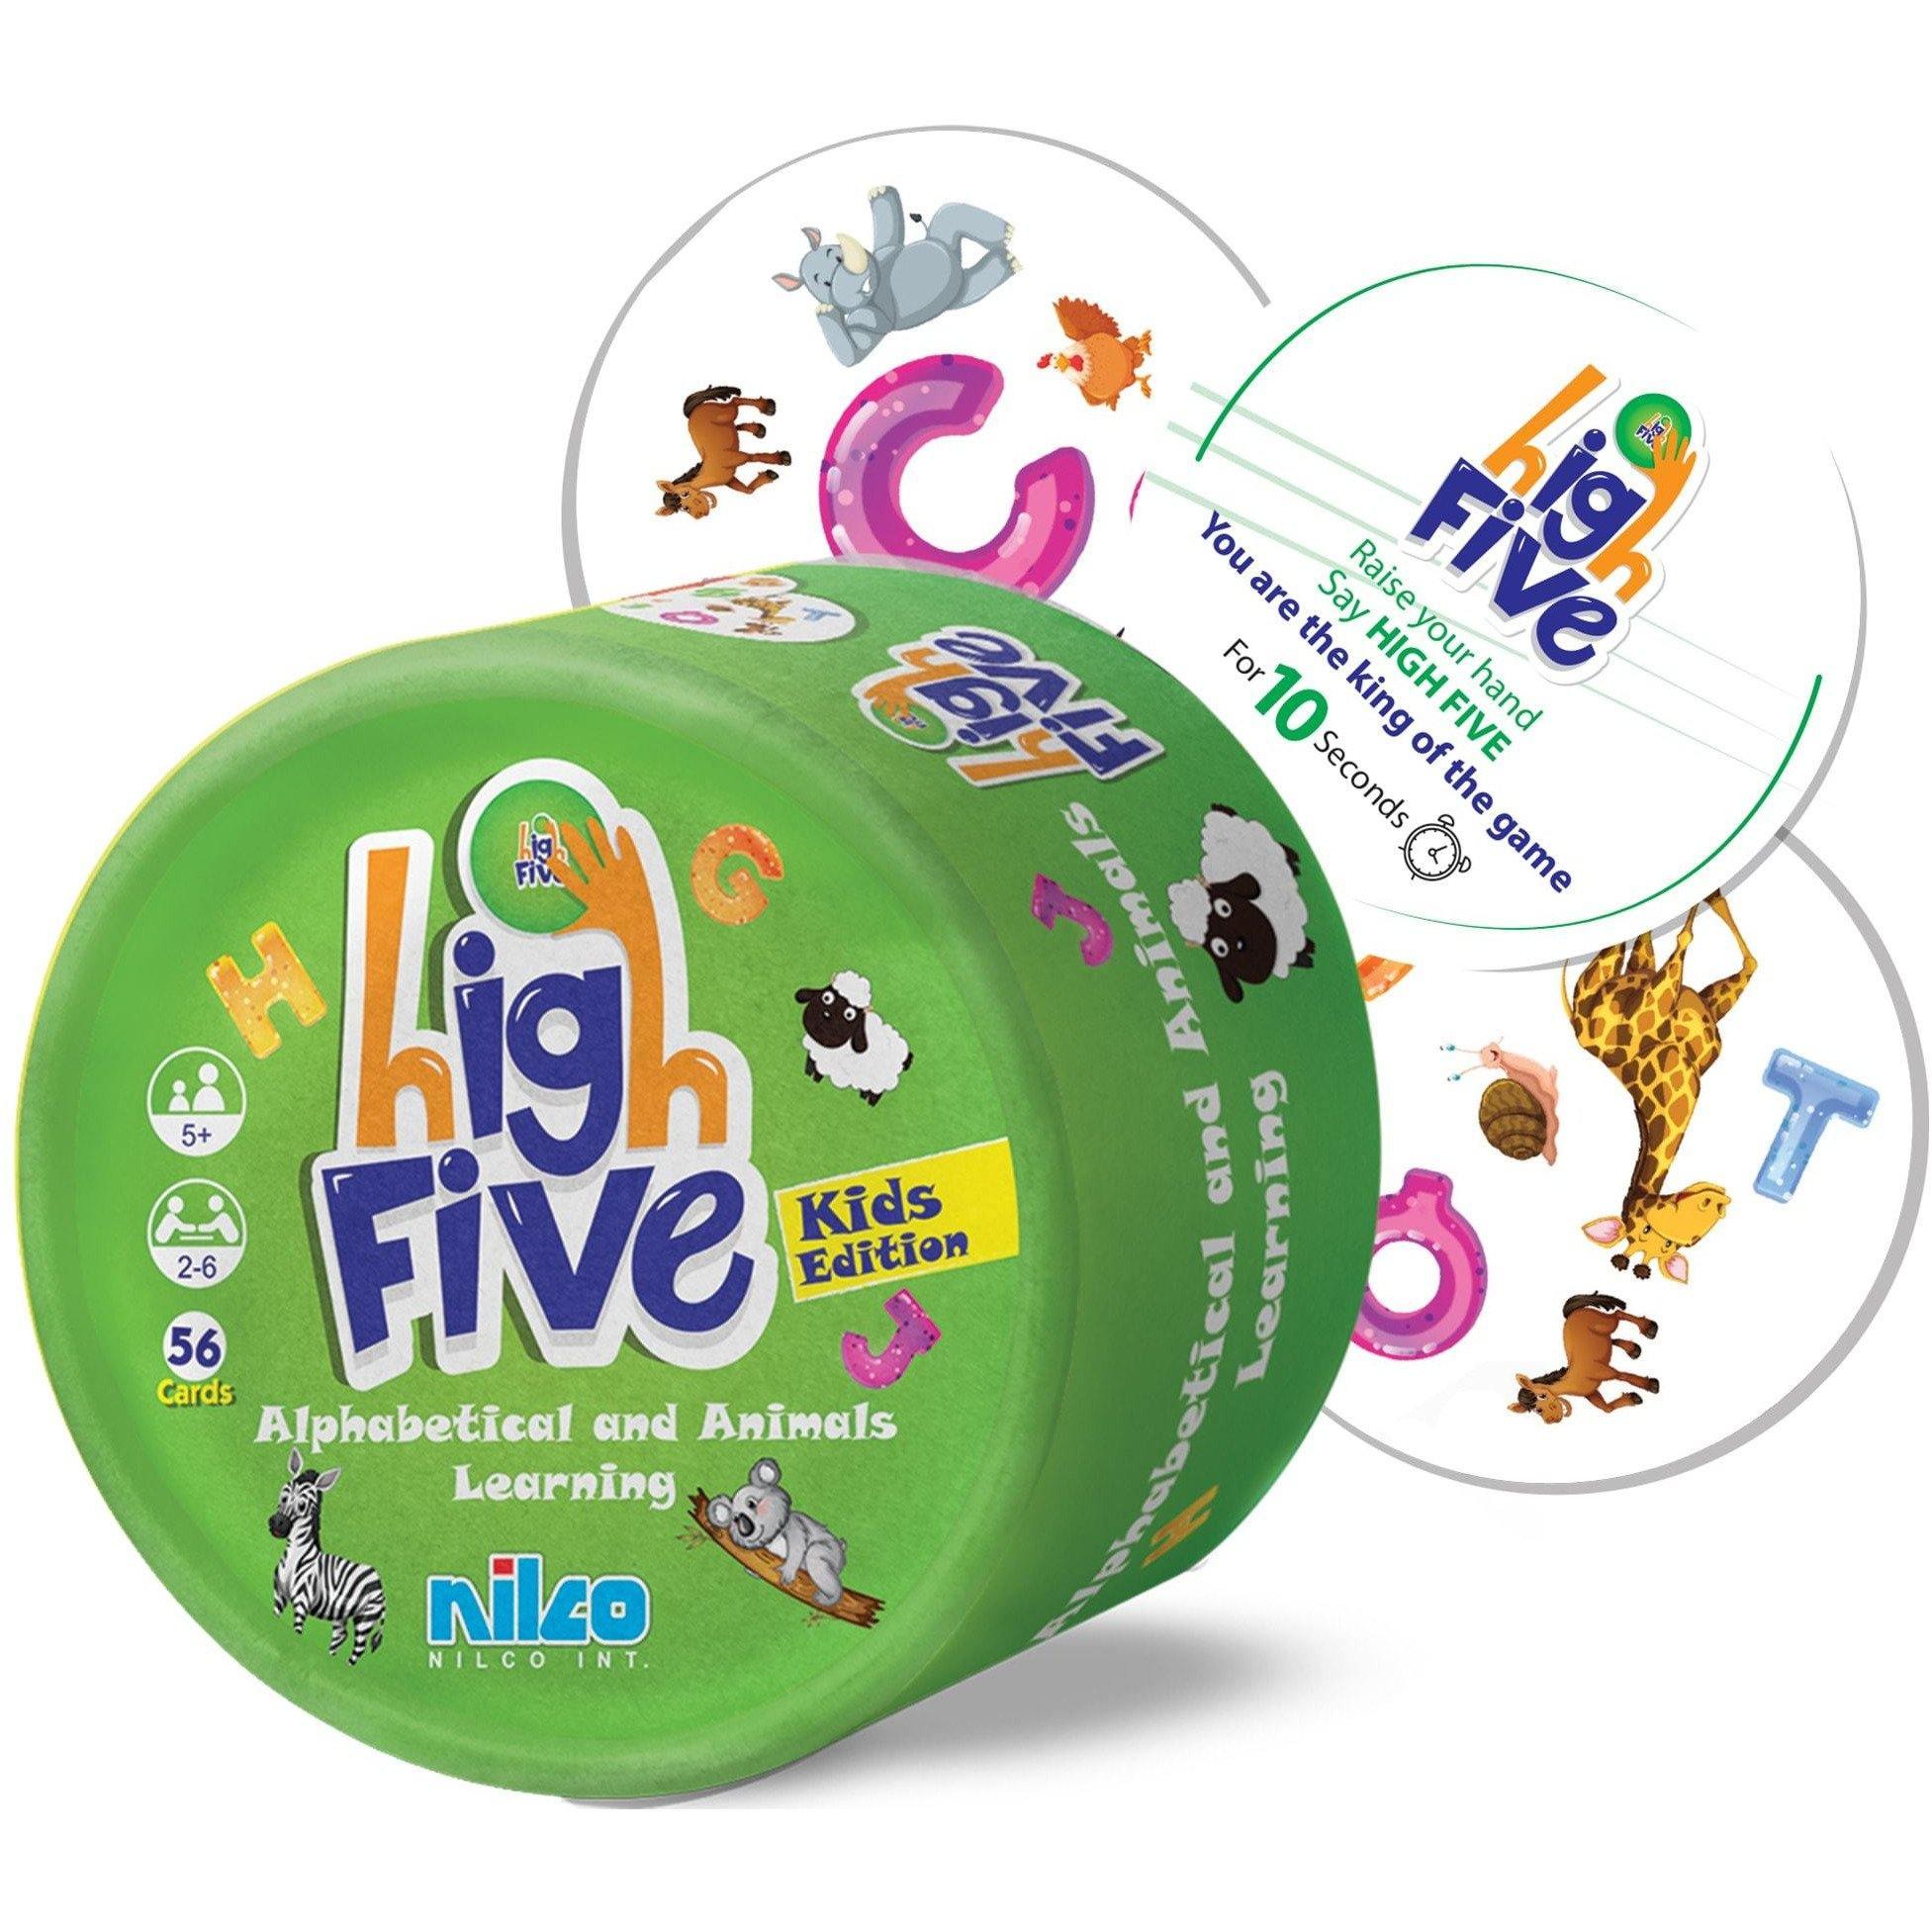 Nilco 8116 High Five Kids Edition Card Game - BumbleToys - 5-7 Years, Boys, Card & Board Games, Girls, Nilco, Puzzle & Board & Card Games